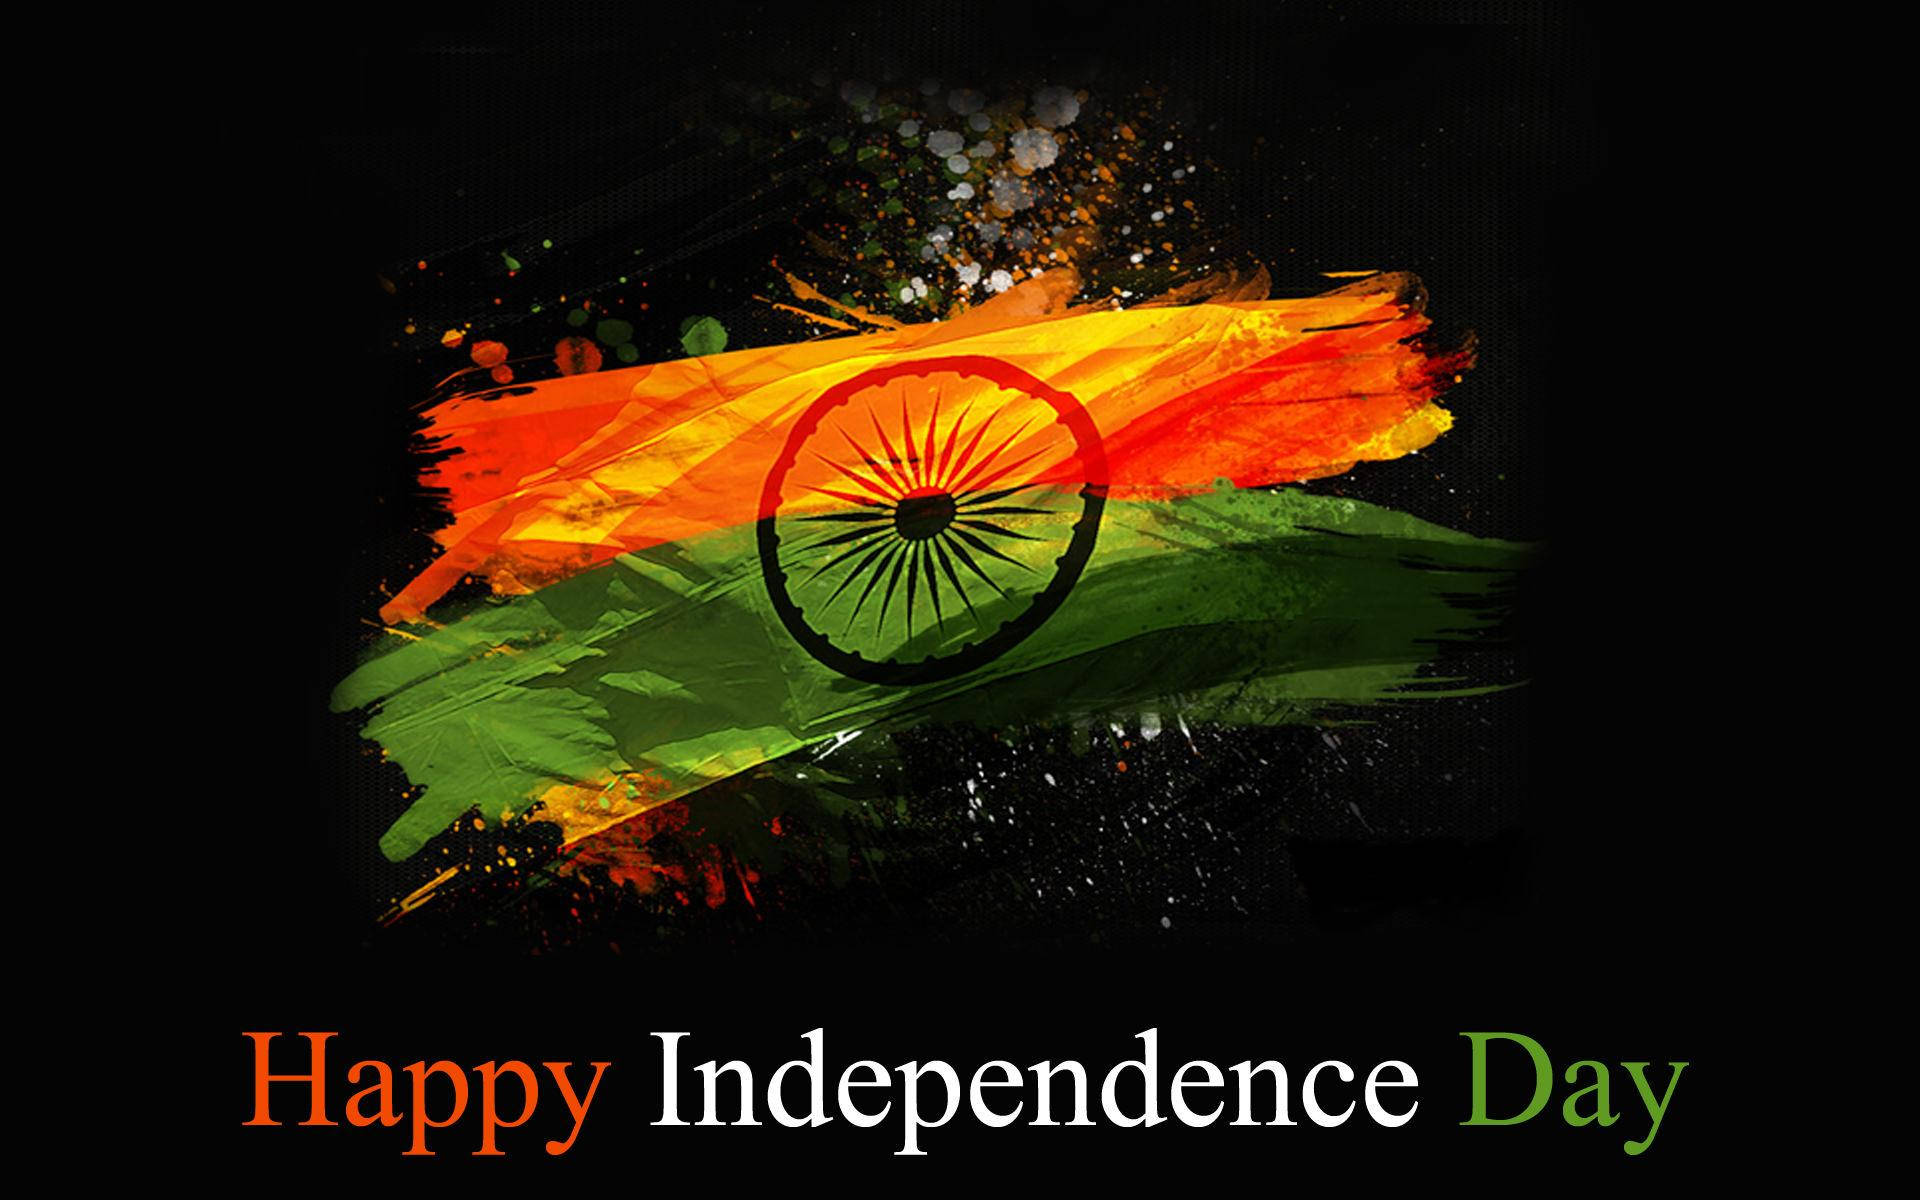 Free Independence Day Wallpaper Downloads, [100+] Independence Day  Wallpapers for FREE 